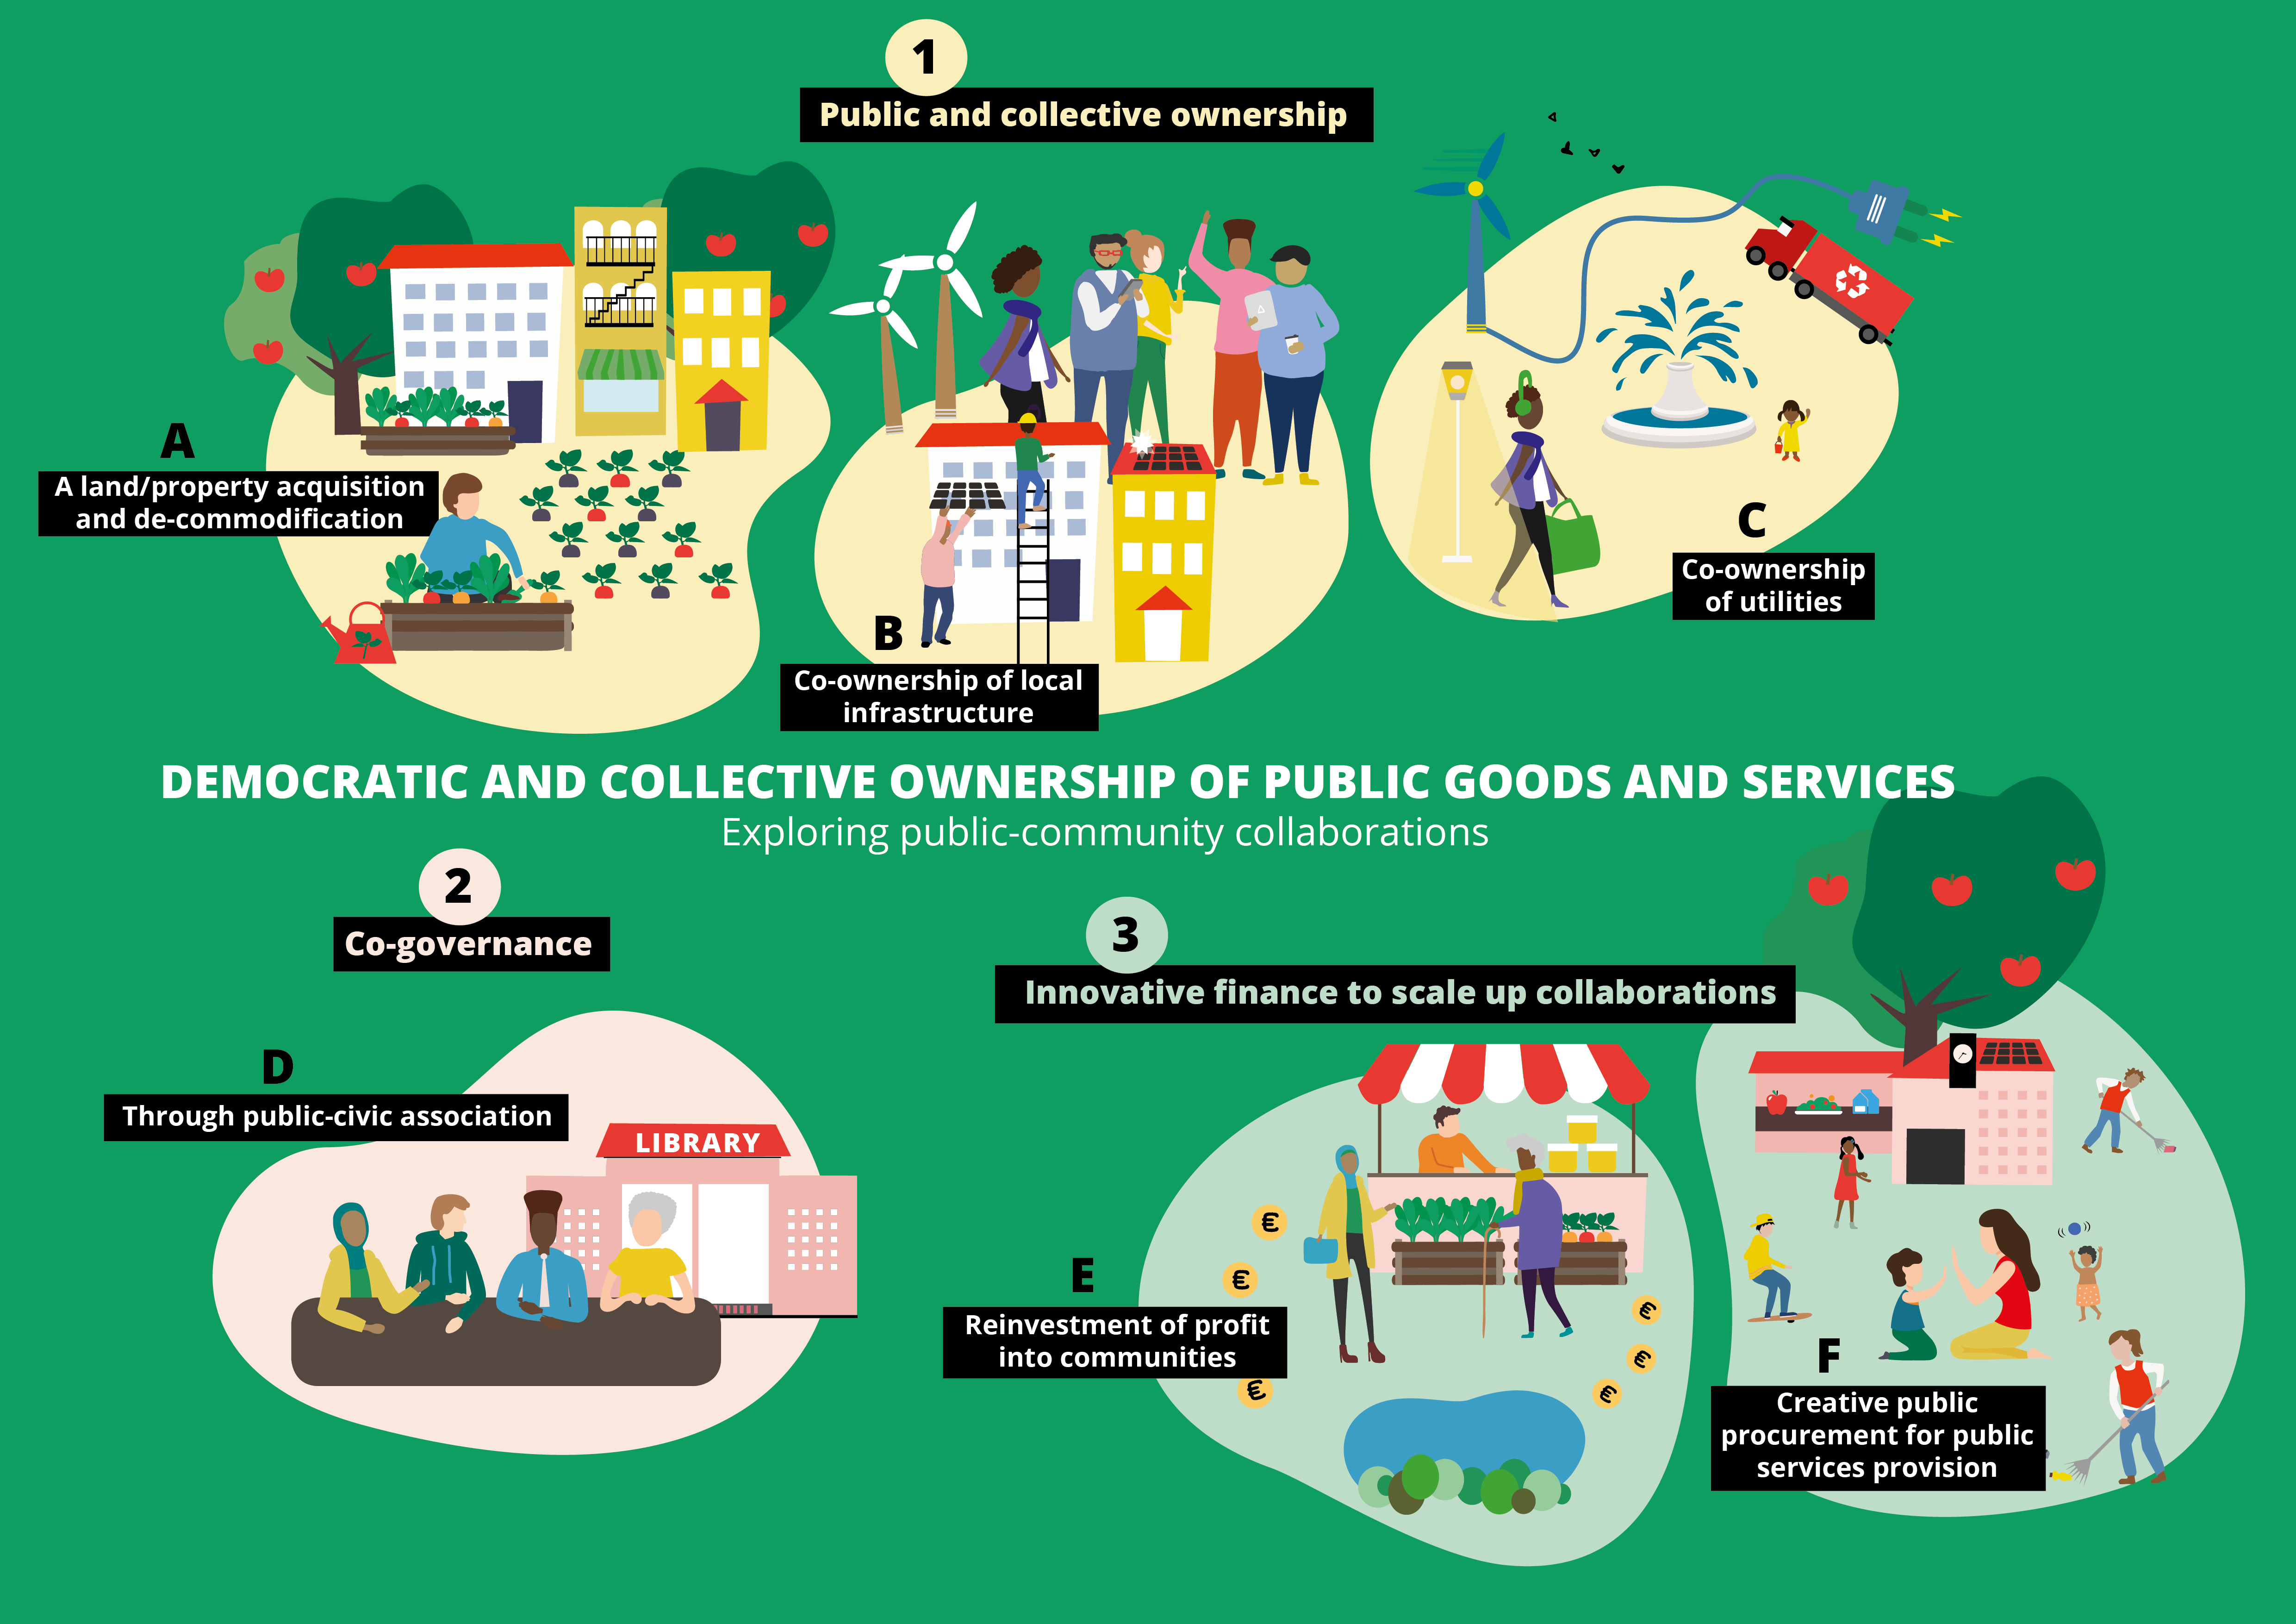 Democratic and collective ownership of public goods and services